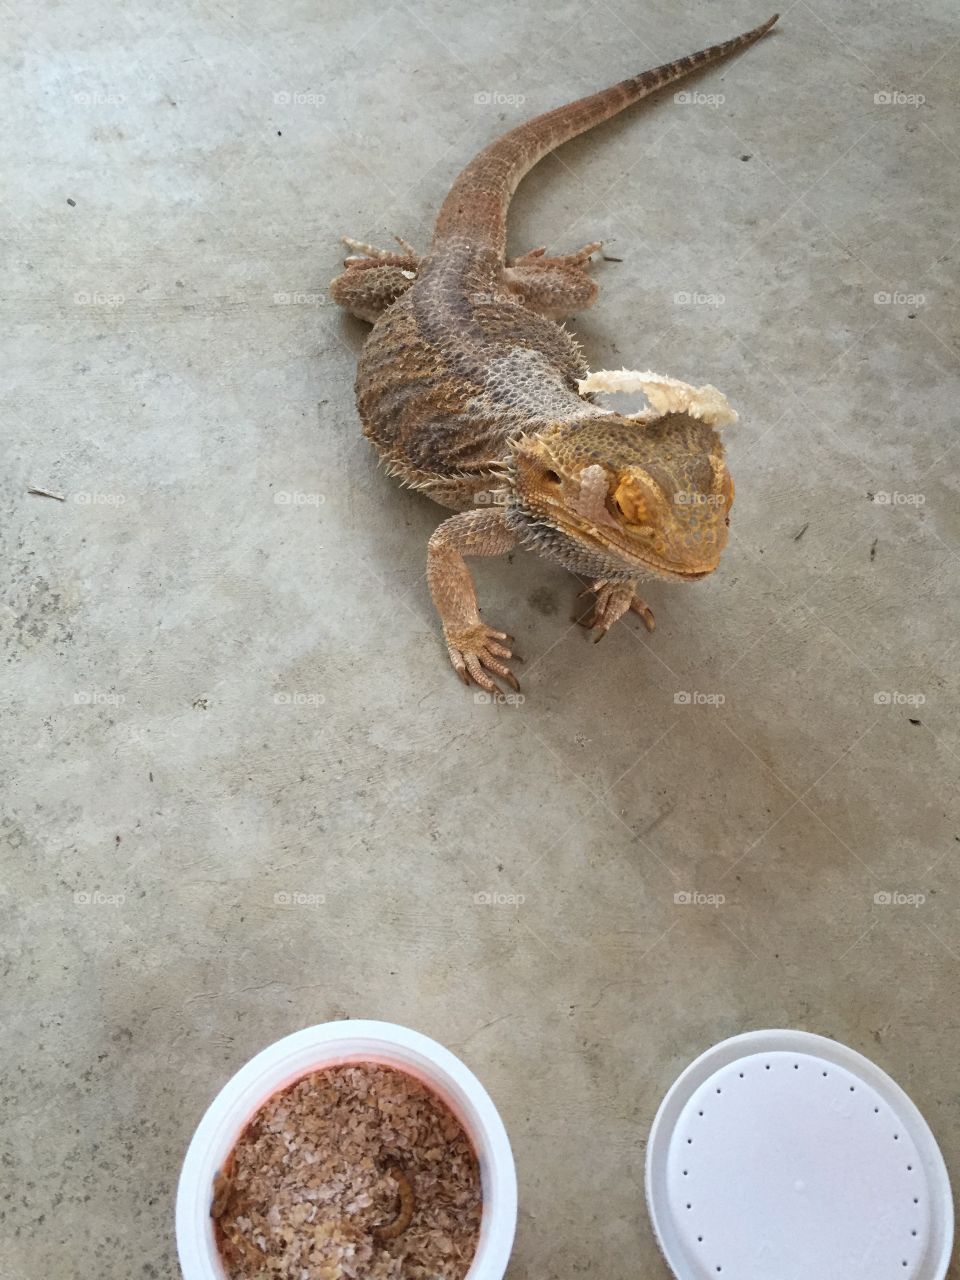 Bearded dragon's meal time